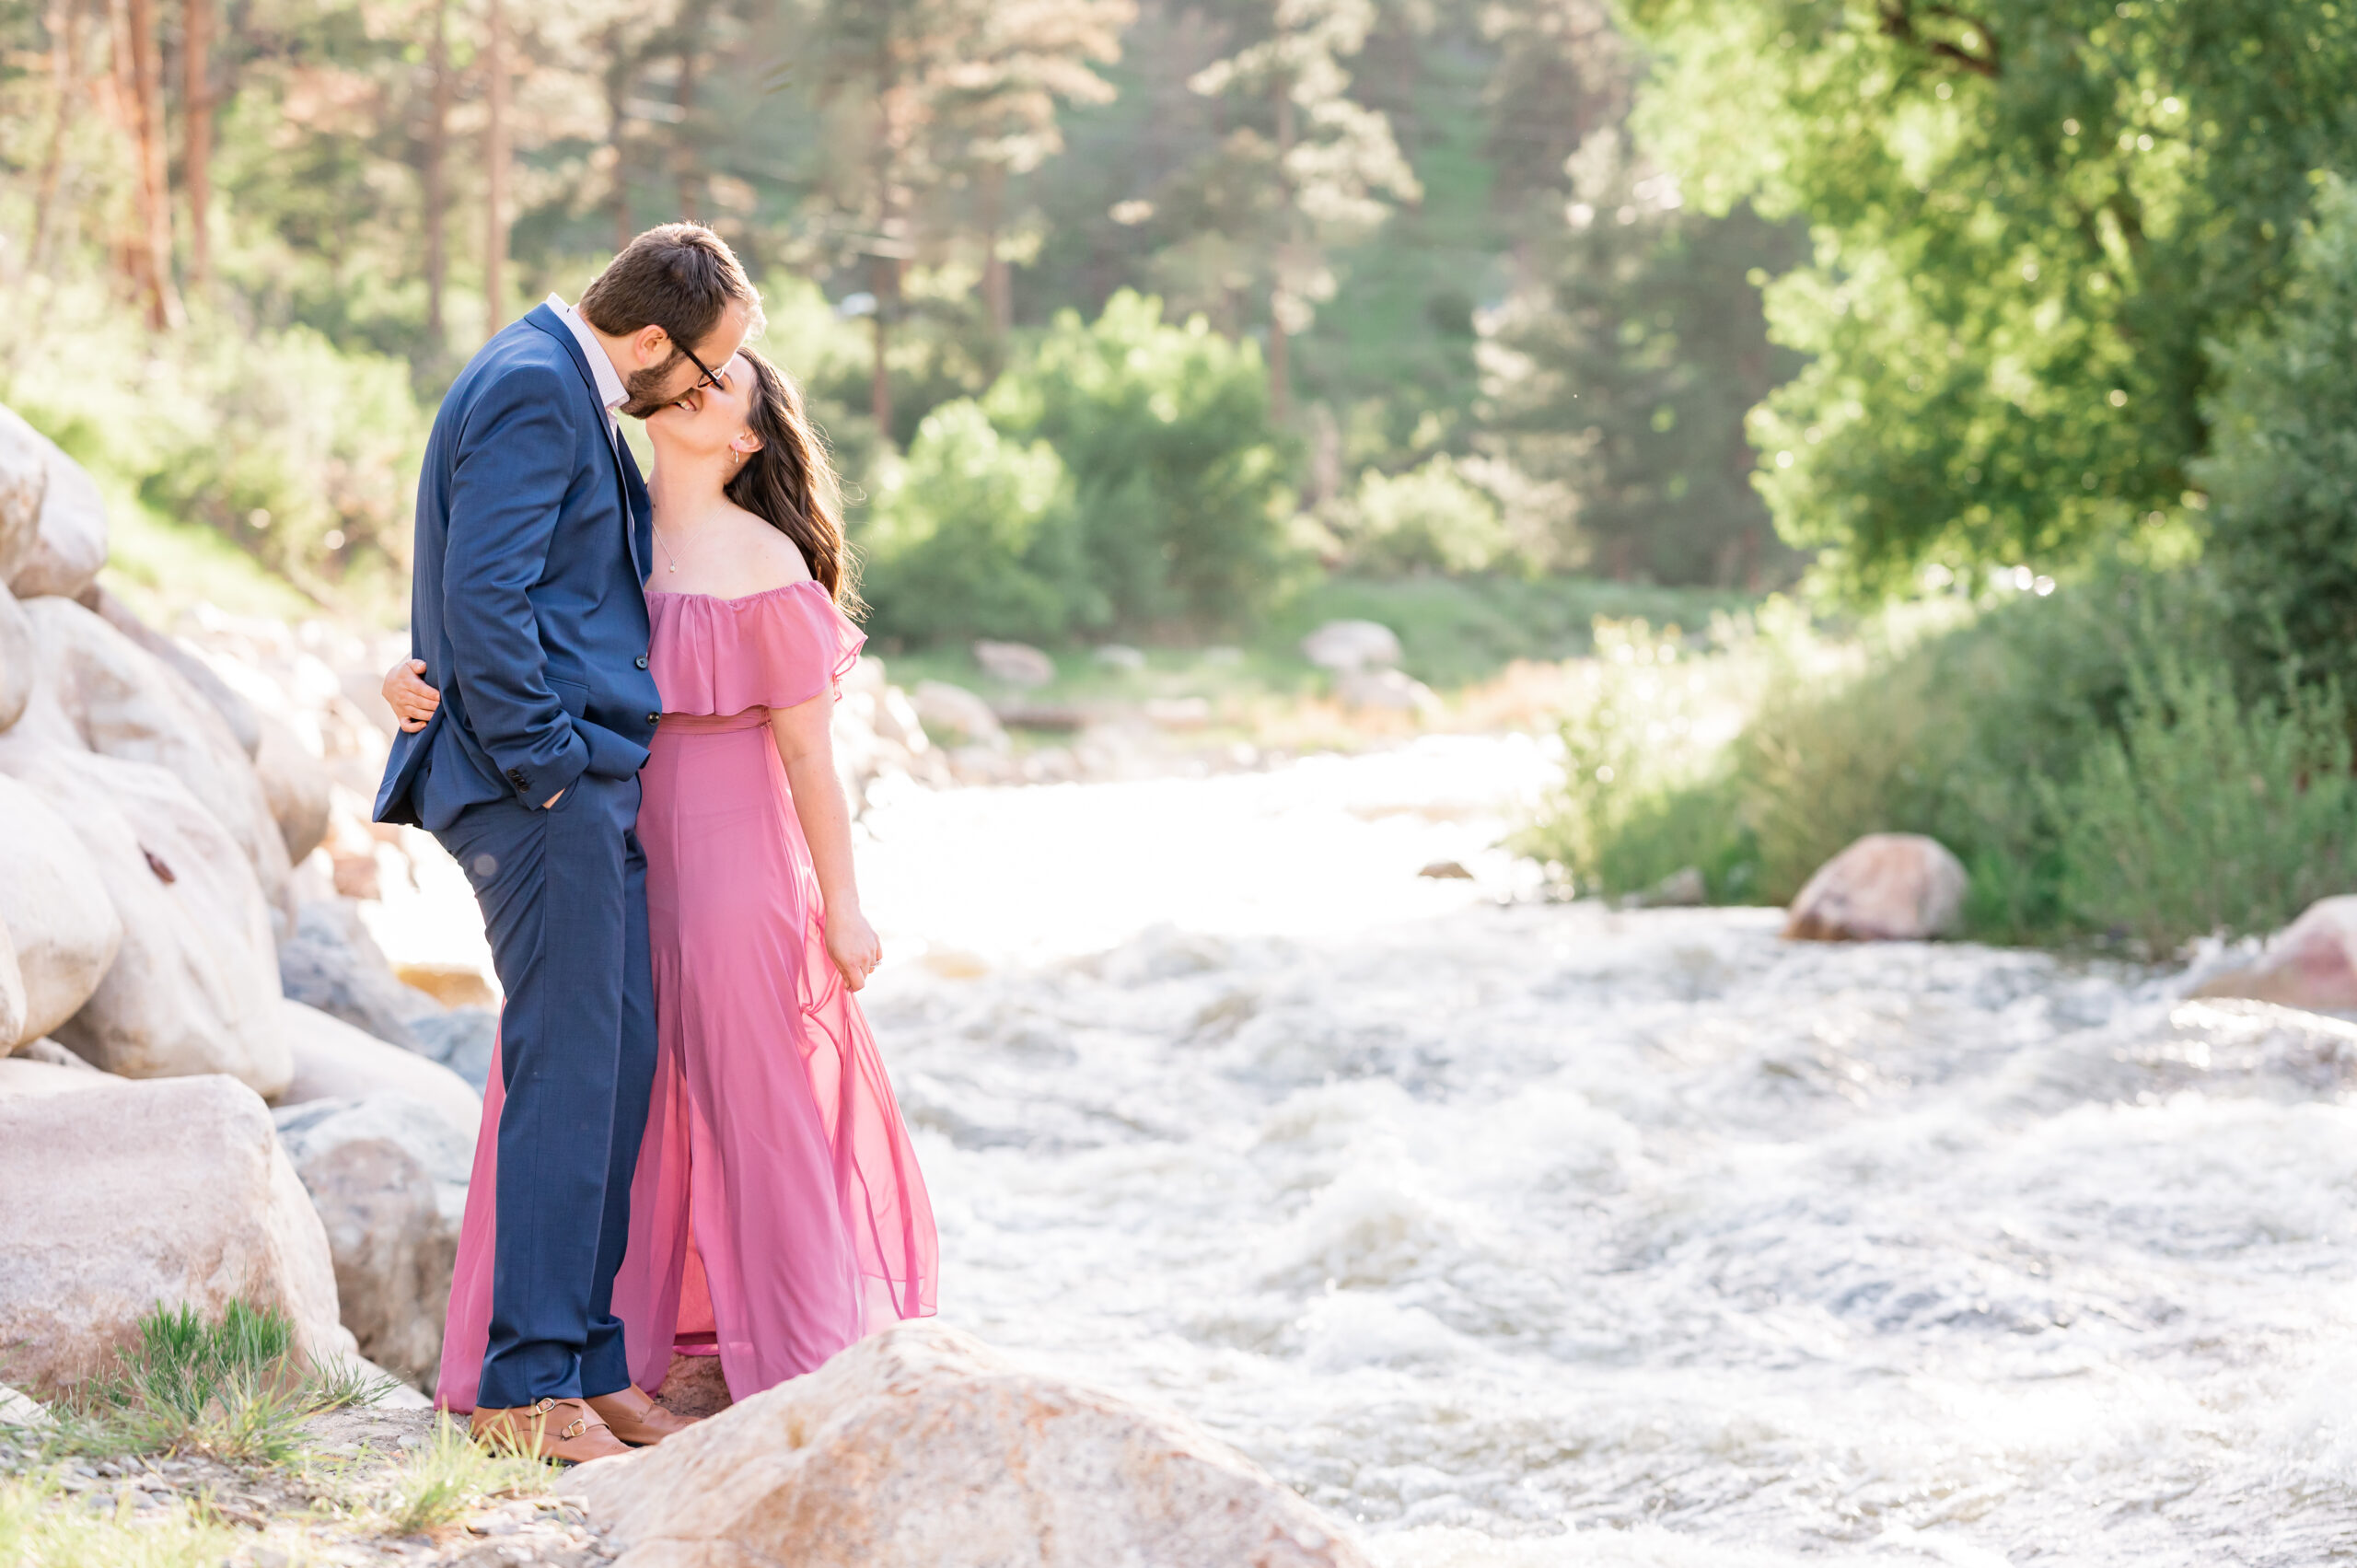 Bethany + Ryan Engagement by the Big Thompson River in Colorado - Britni Girard Photography - Estes Park Photographer